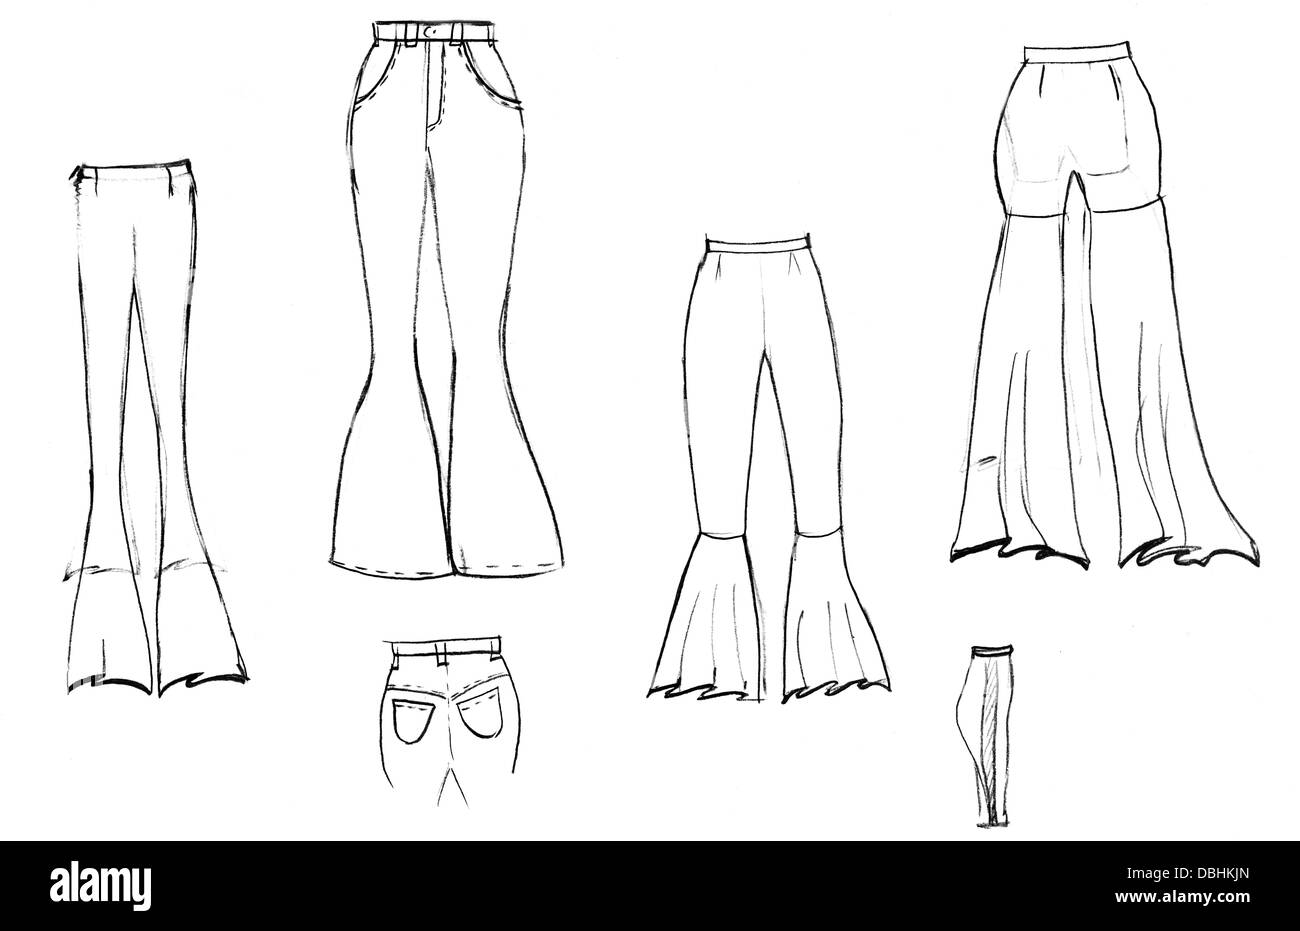 Share 86+ trouser pants drawing latest - in.cdgdbentre